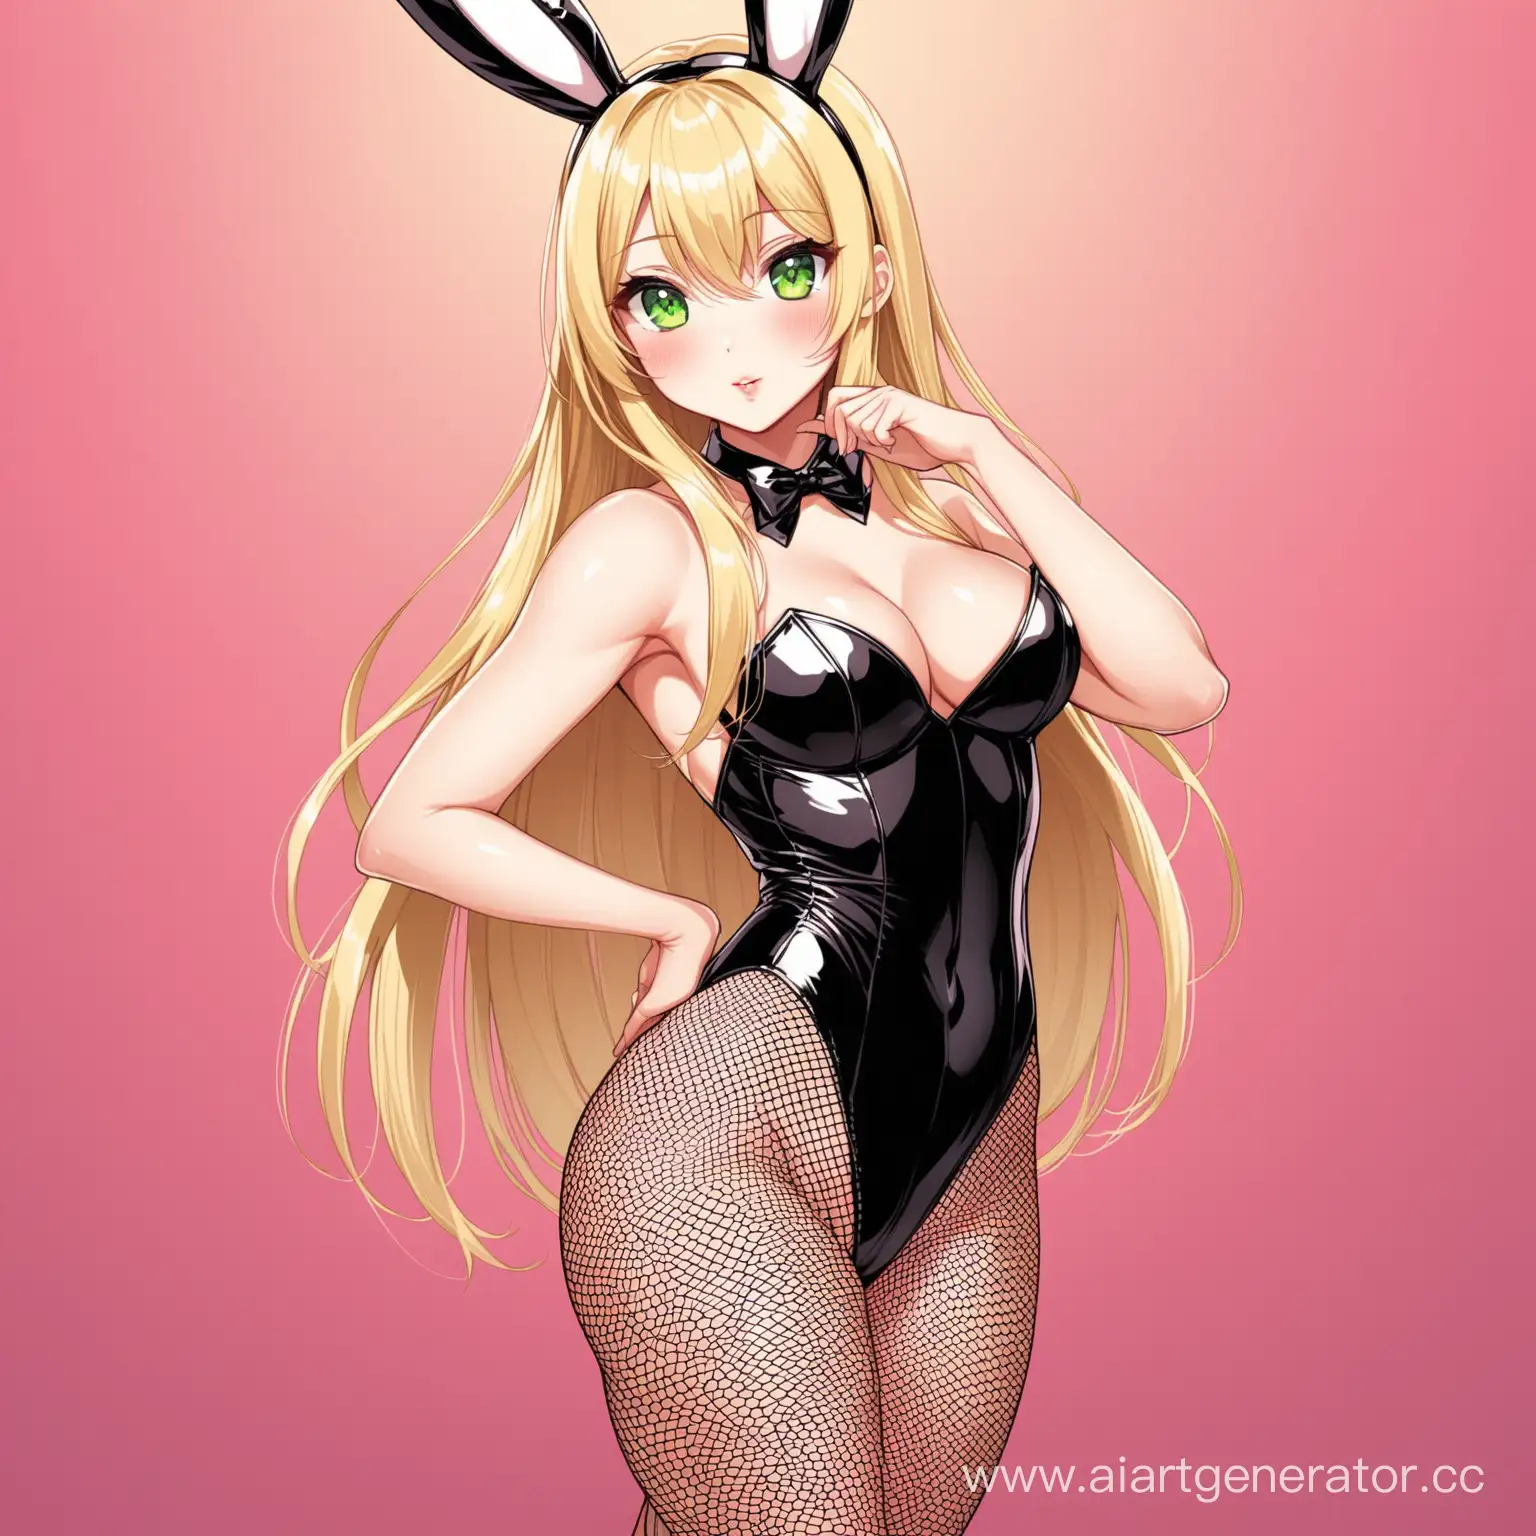 Seductive-Bunny-Girl-in-Fishnet-Tights-with-Long-Blonde-Hair-and-Green-Eyes